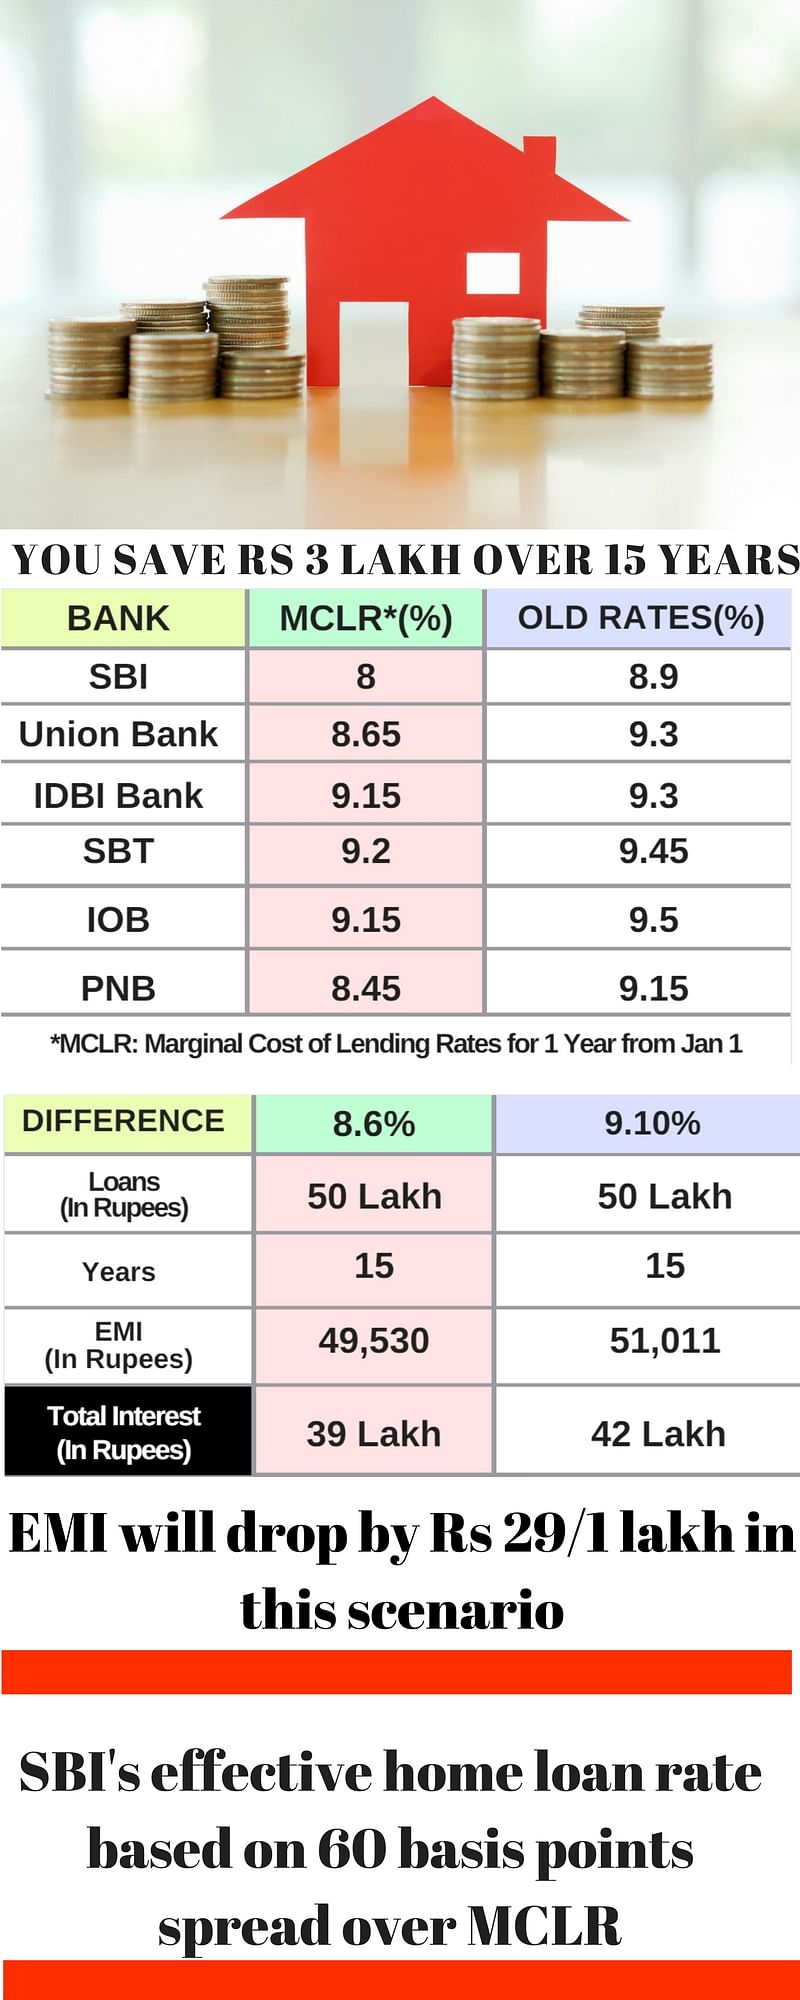 State Bank of India has cut rates for loans up to Rs 75 lakh to 8.6% from 9.10% earlier.